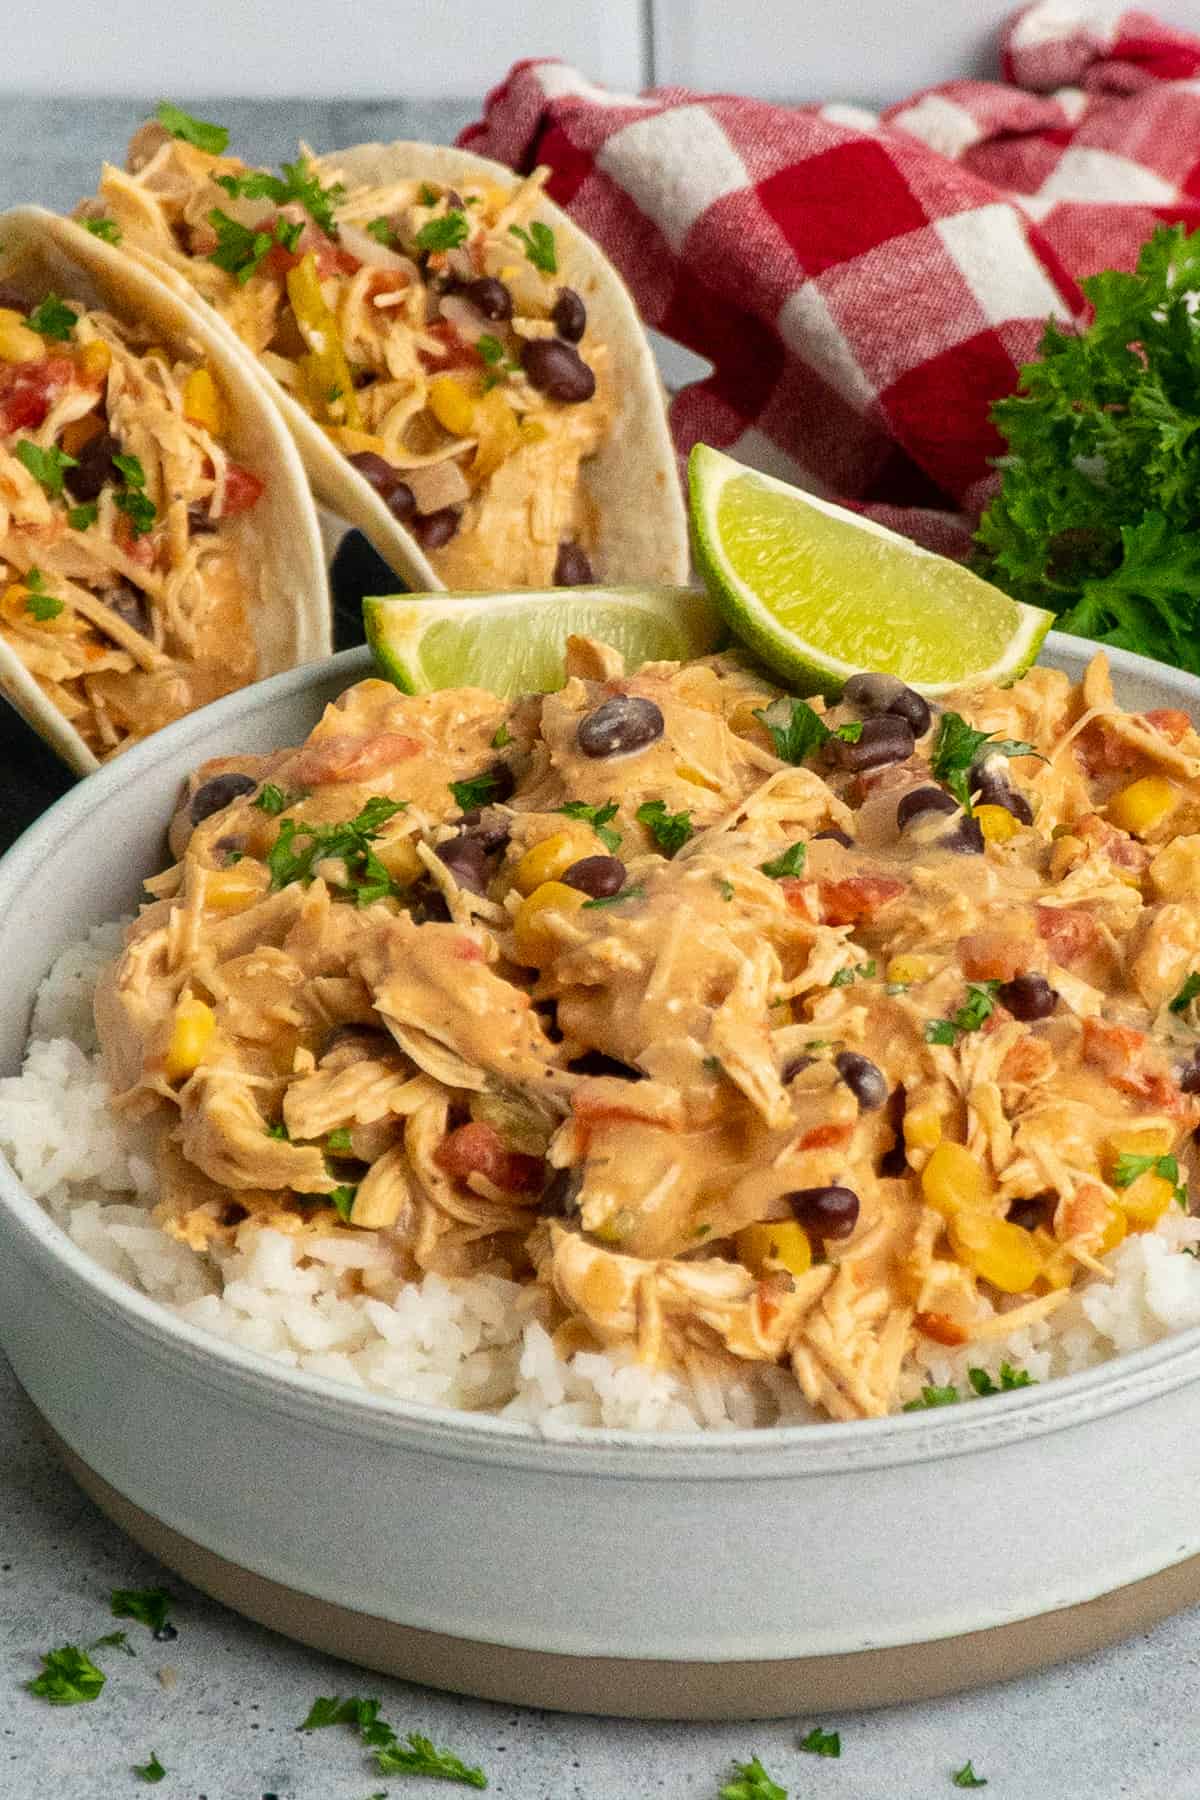 Fiesta chicken over rice and in tacos.